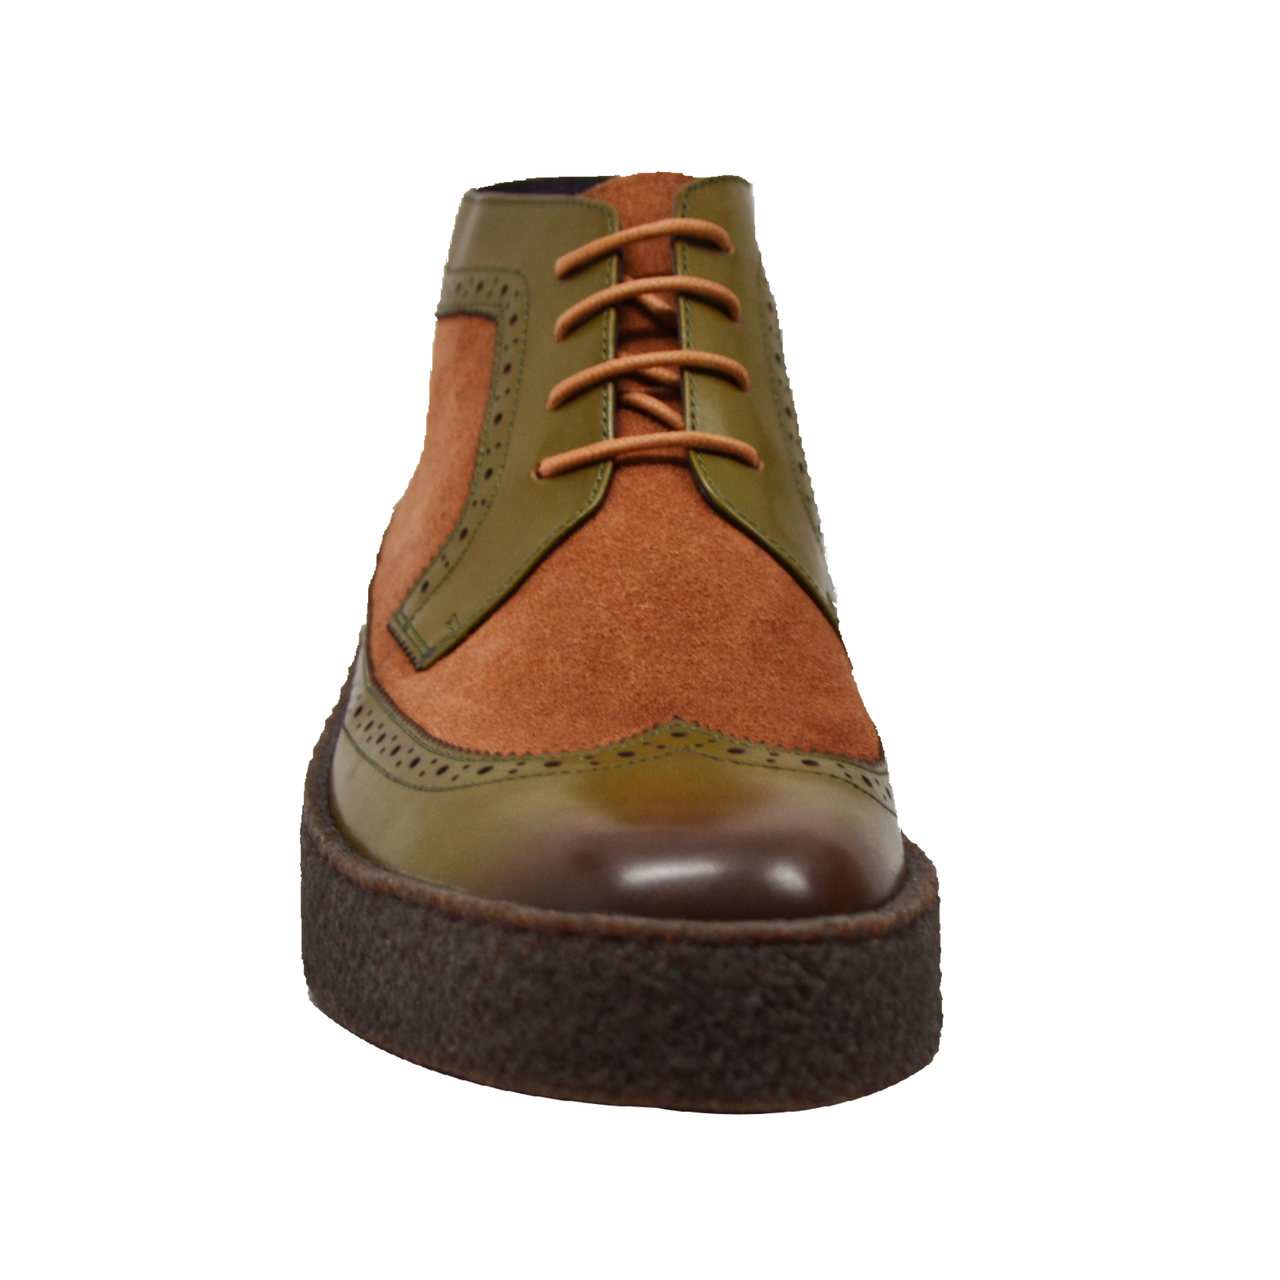 British Walkers Custom Made Original Playboy Wingtips Men's Green Leather and Brown Suede High Tops